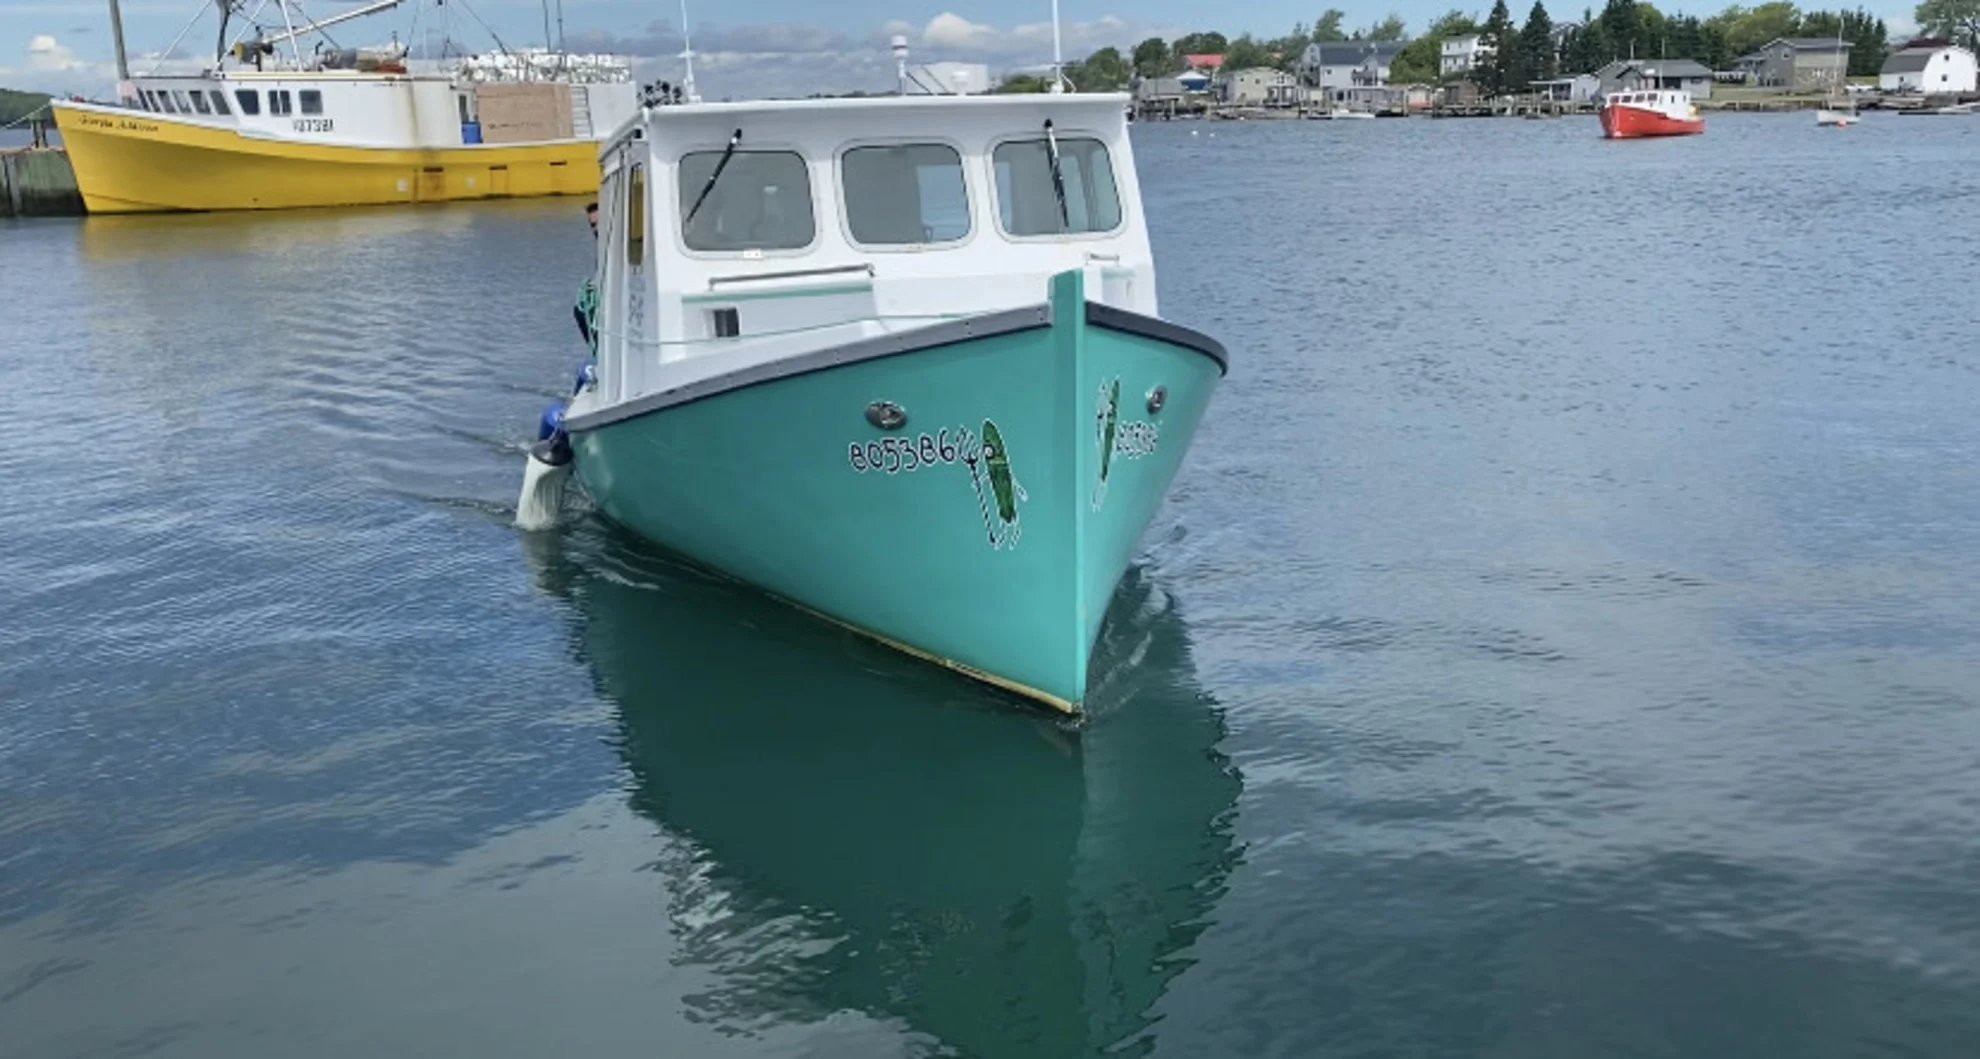 Electric lobster boats: Bringing future resiliency to energy infrastructure